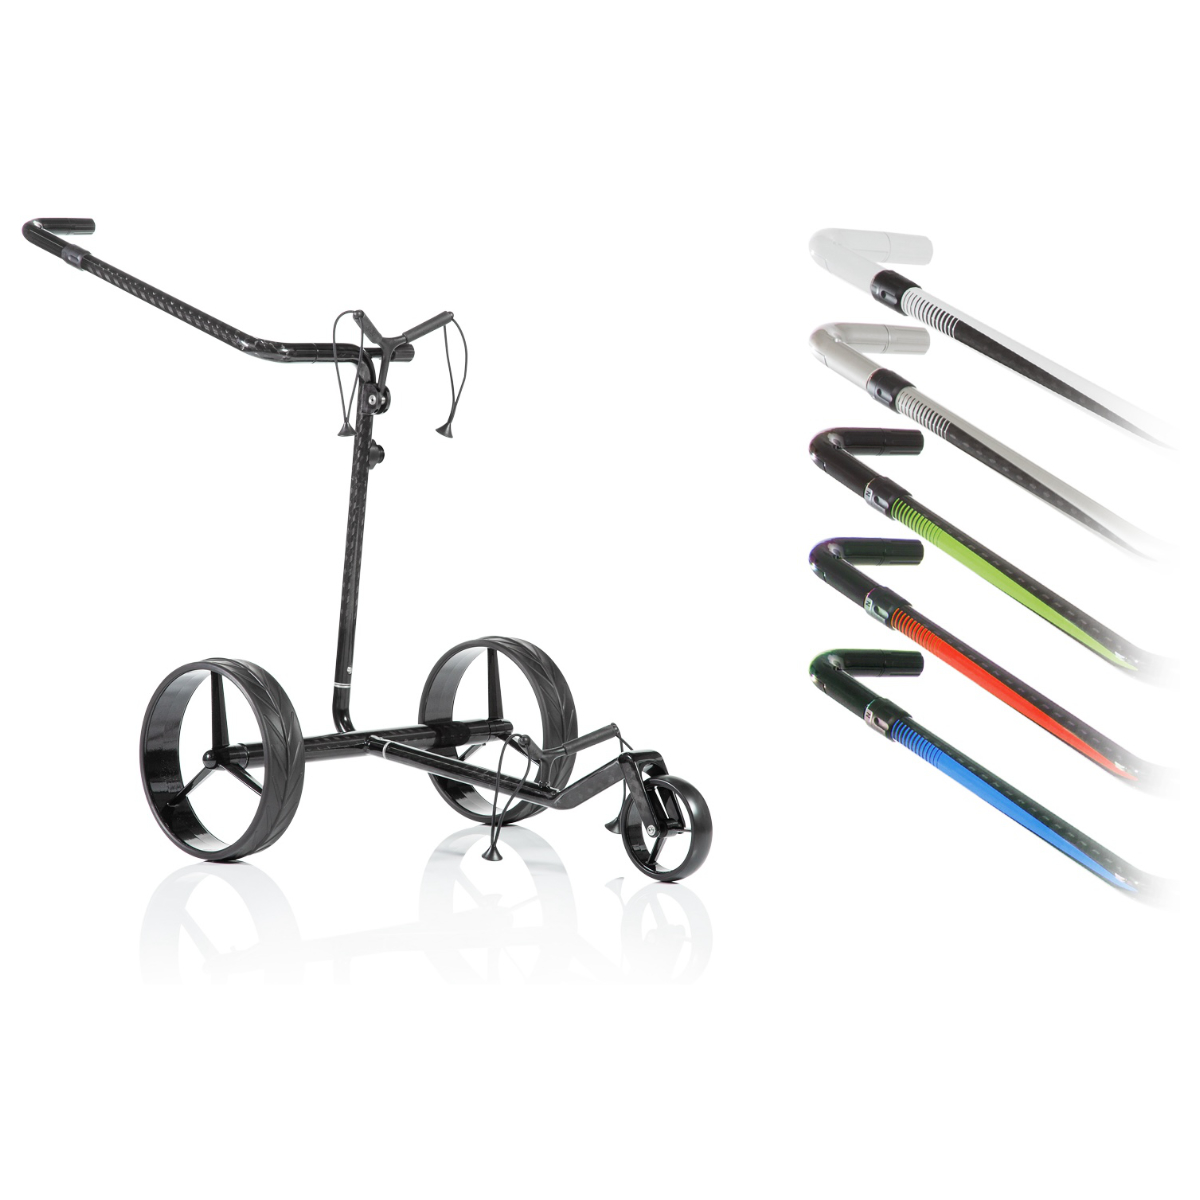 JuCad Carbon Travel 2.0 Black/Red E-Trolley